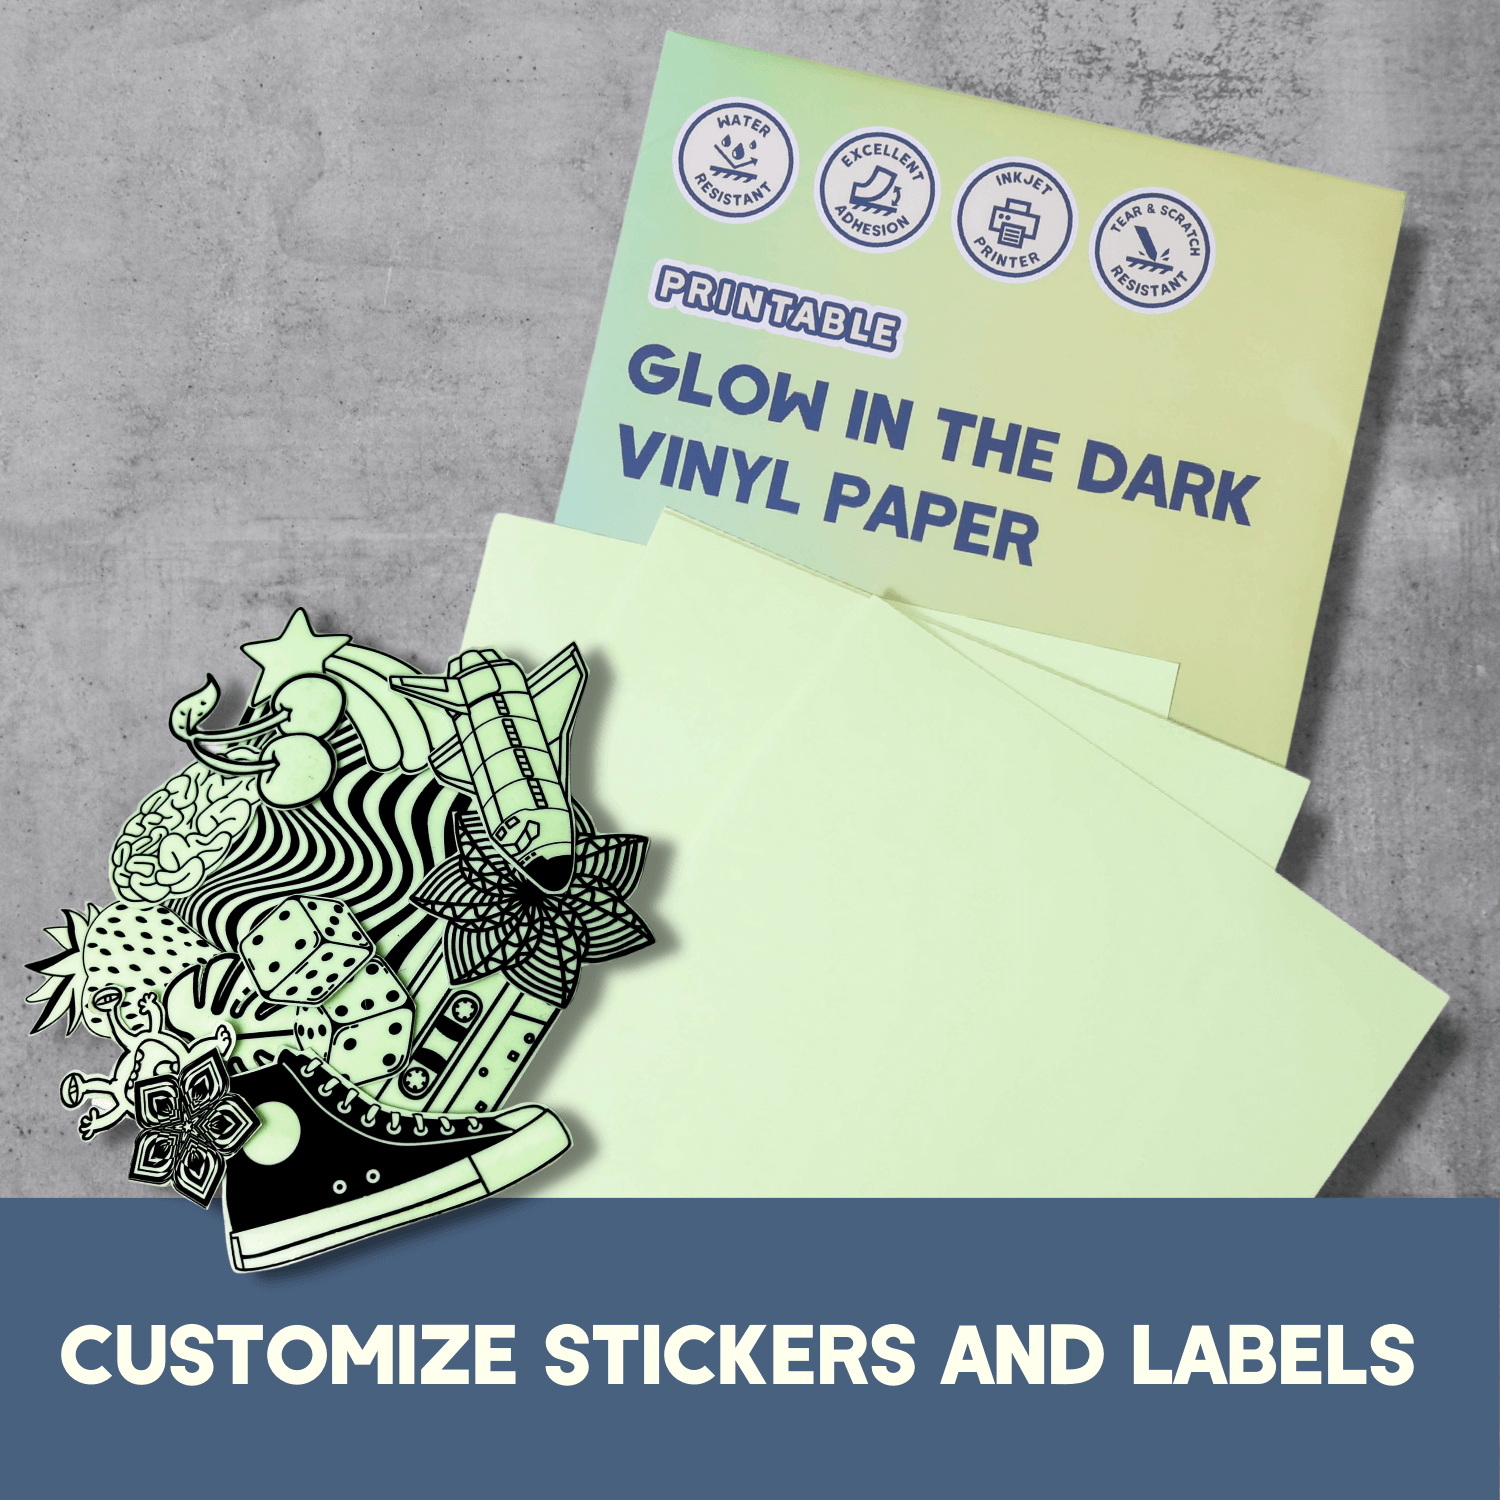 hayes-paper-printable-glow-in-the-dark-vinyl-paper-5-pack-a4-size